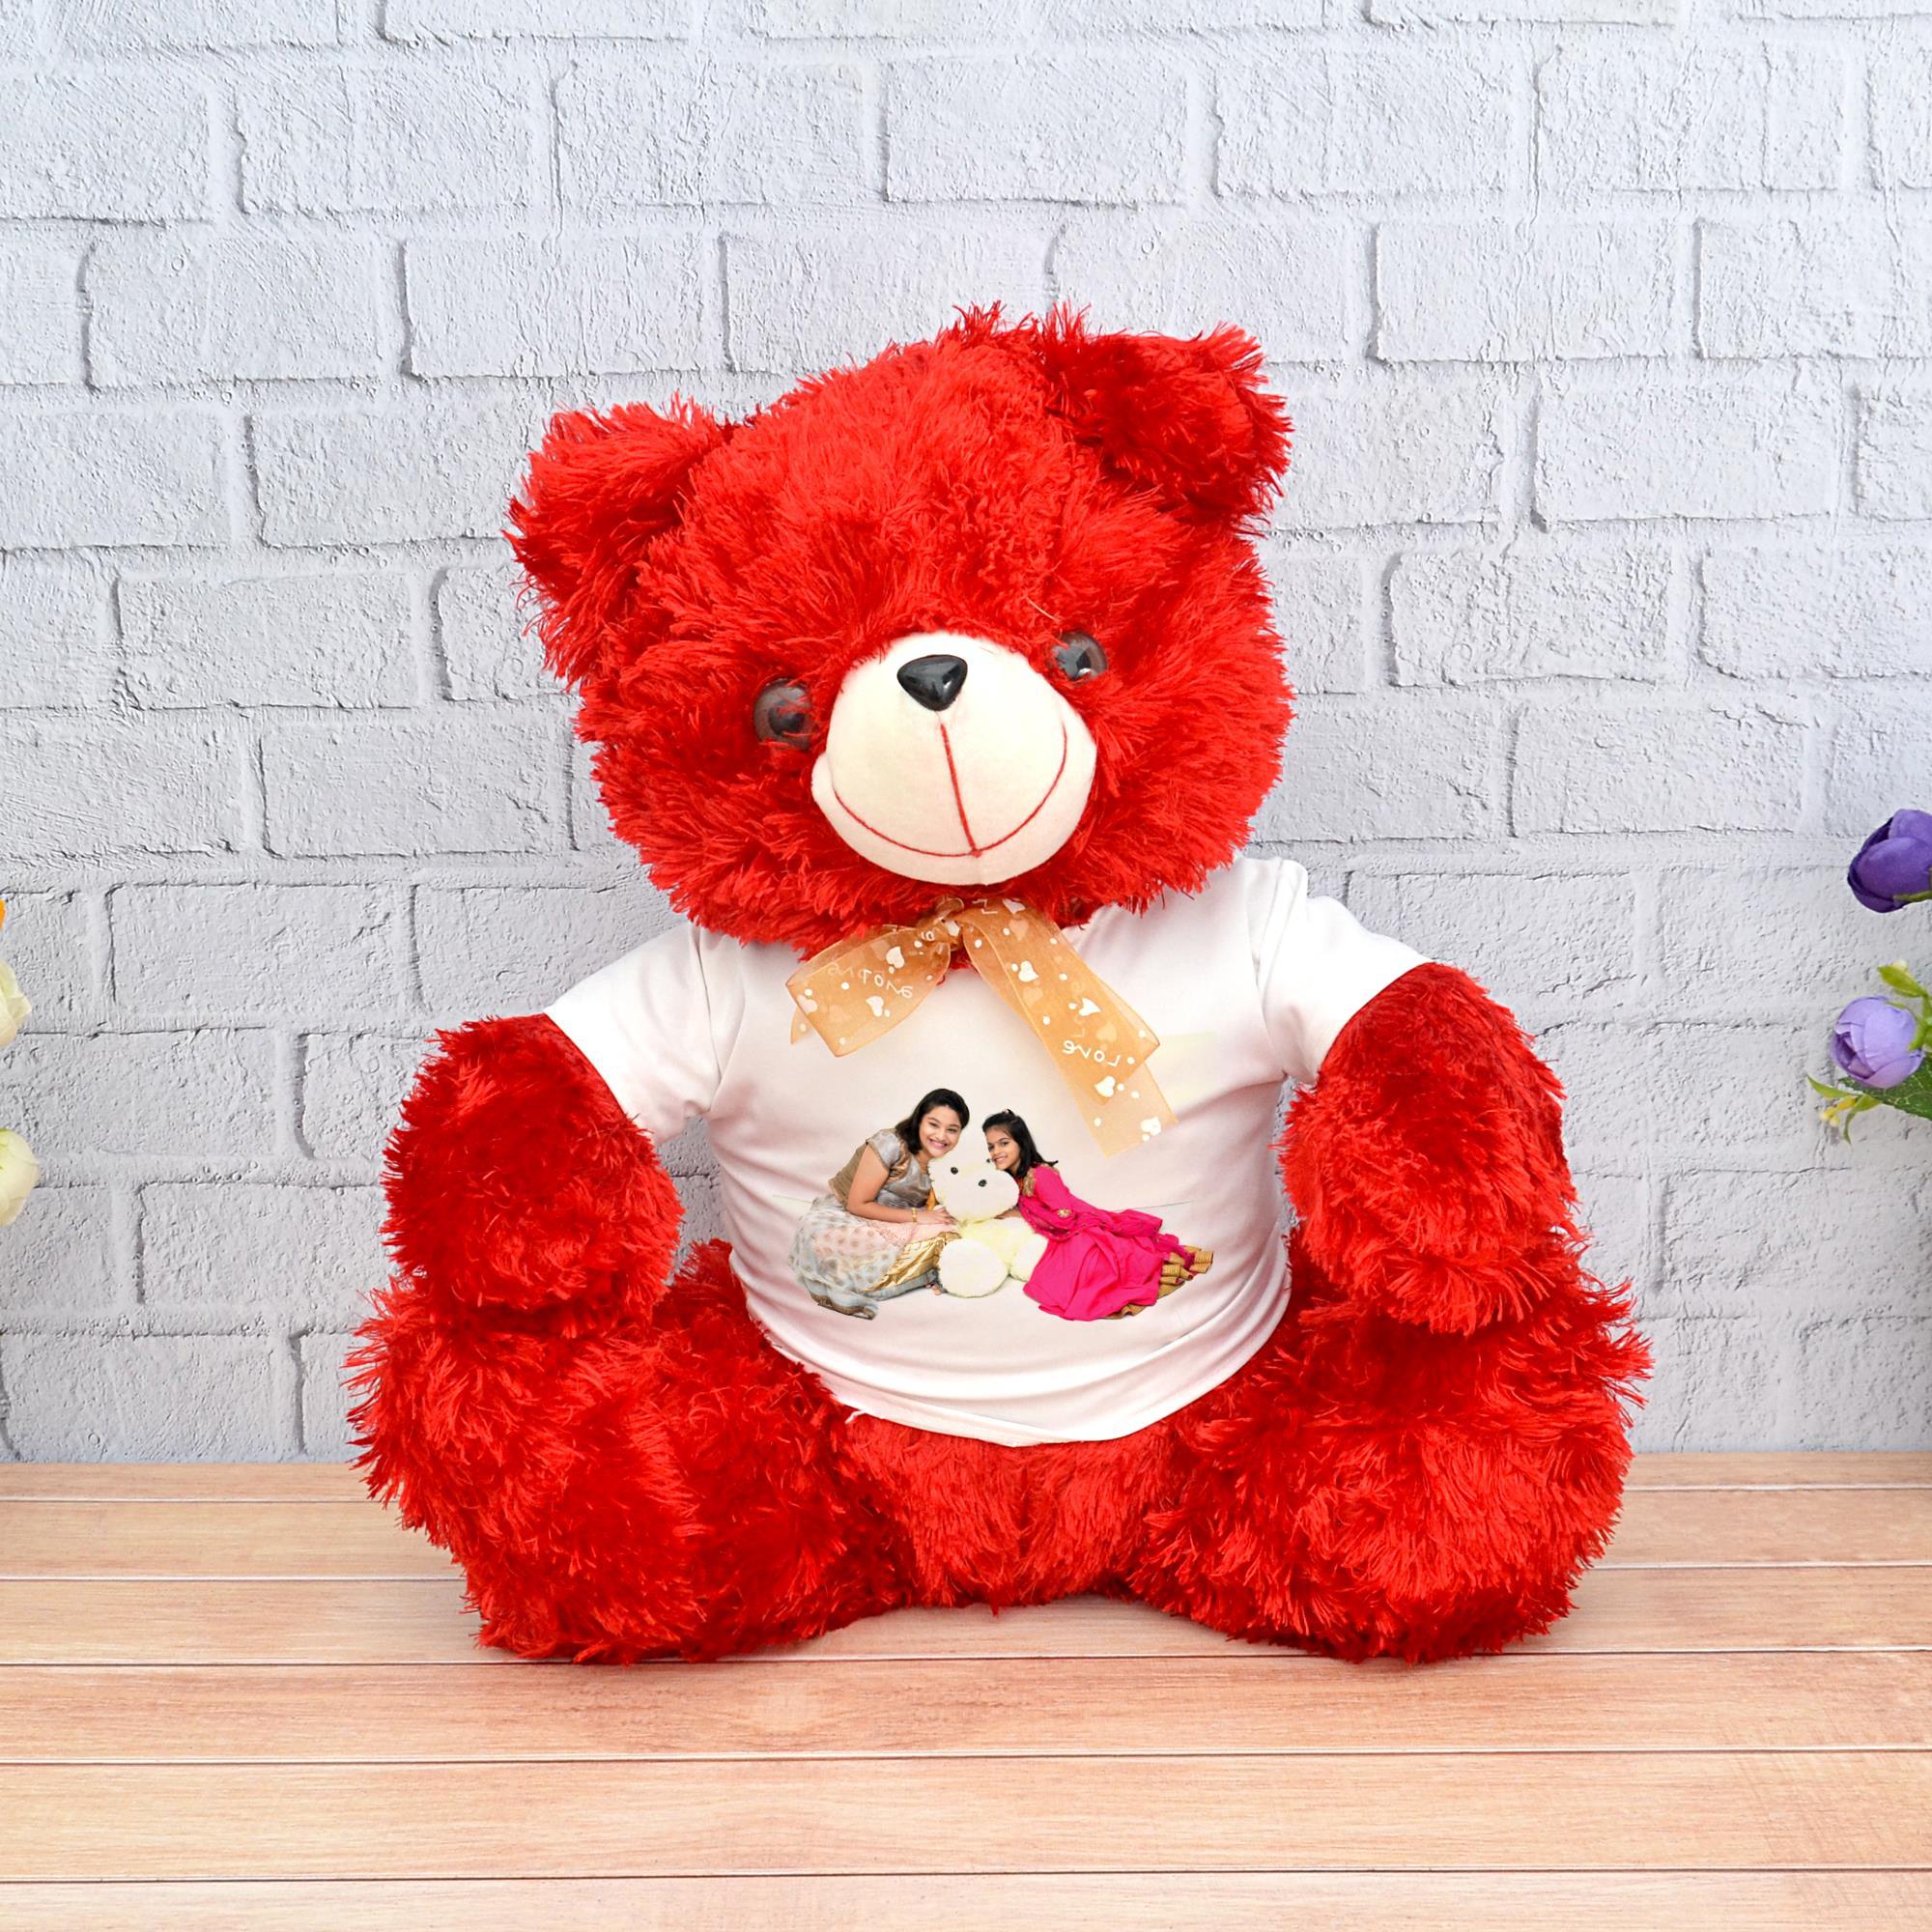 Dukiekooky Teddy Bear With Bow Tie Soft Toy White Height 20 cm Online  India, Buy Soft Toys for (3-8Years) at FirstCry.com - 10709613